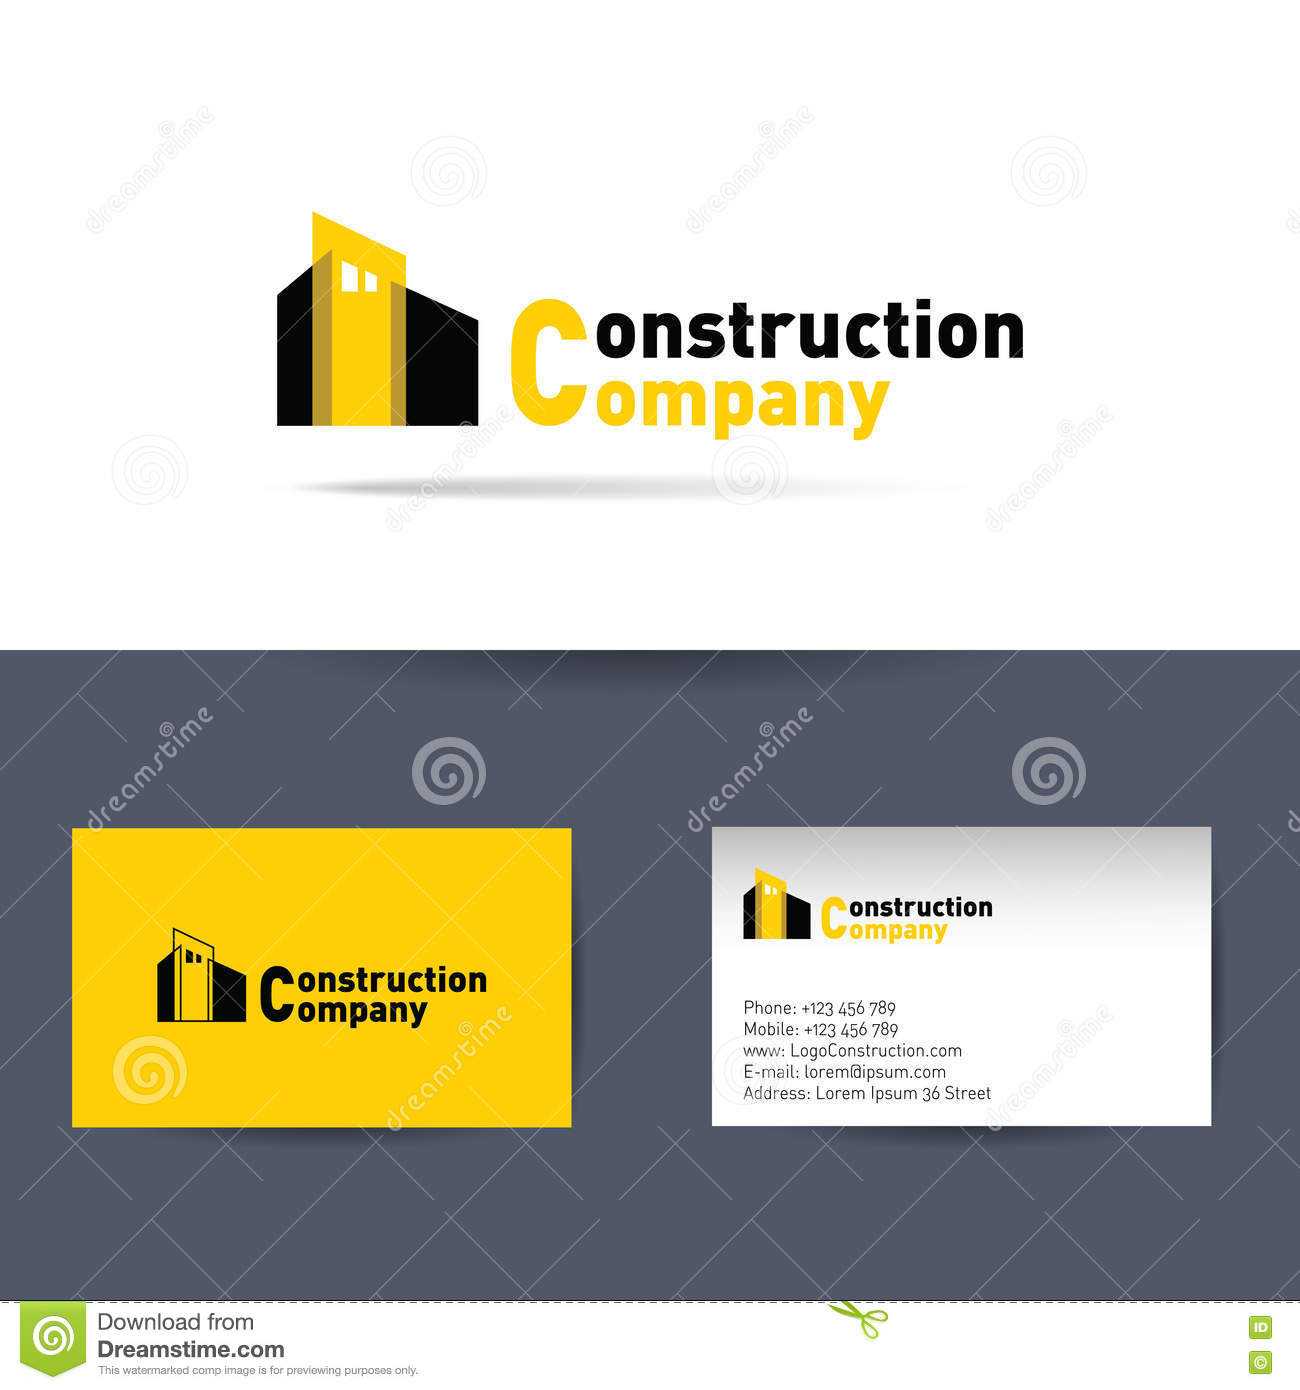 Construction Business Cards Template - Logo Design Ideas Regarding Construction Business Card Templates Download Free